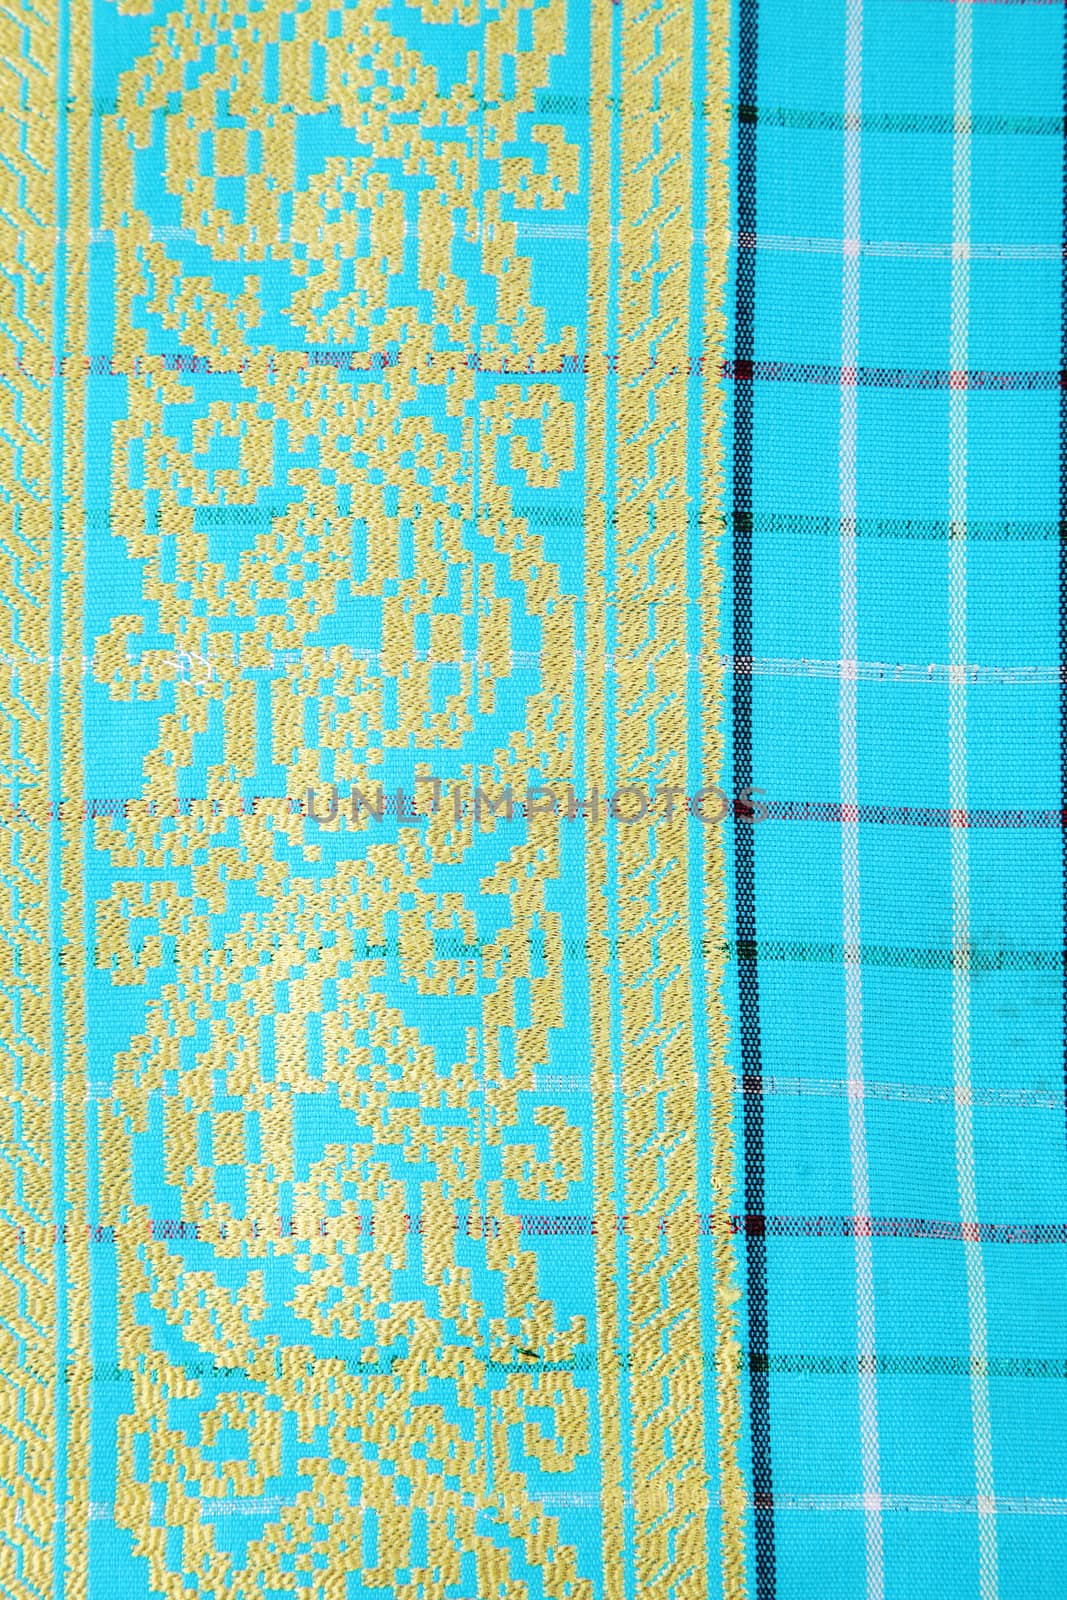 Malaysia Songket .Songket is a fabric that belongs to the brocade family of textiles of Indonesia, Malaysia and Brunei. It is hand-woven in silk or cotton